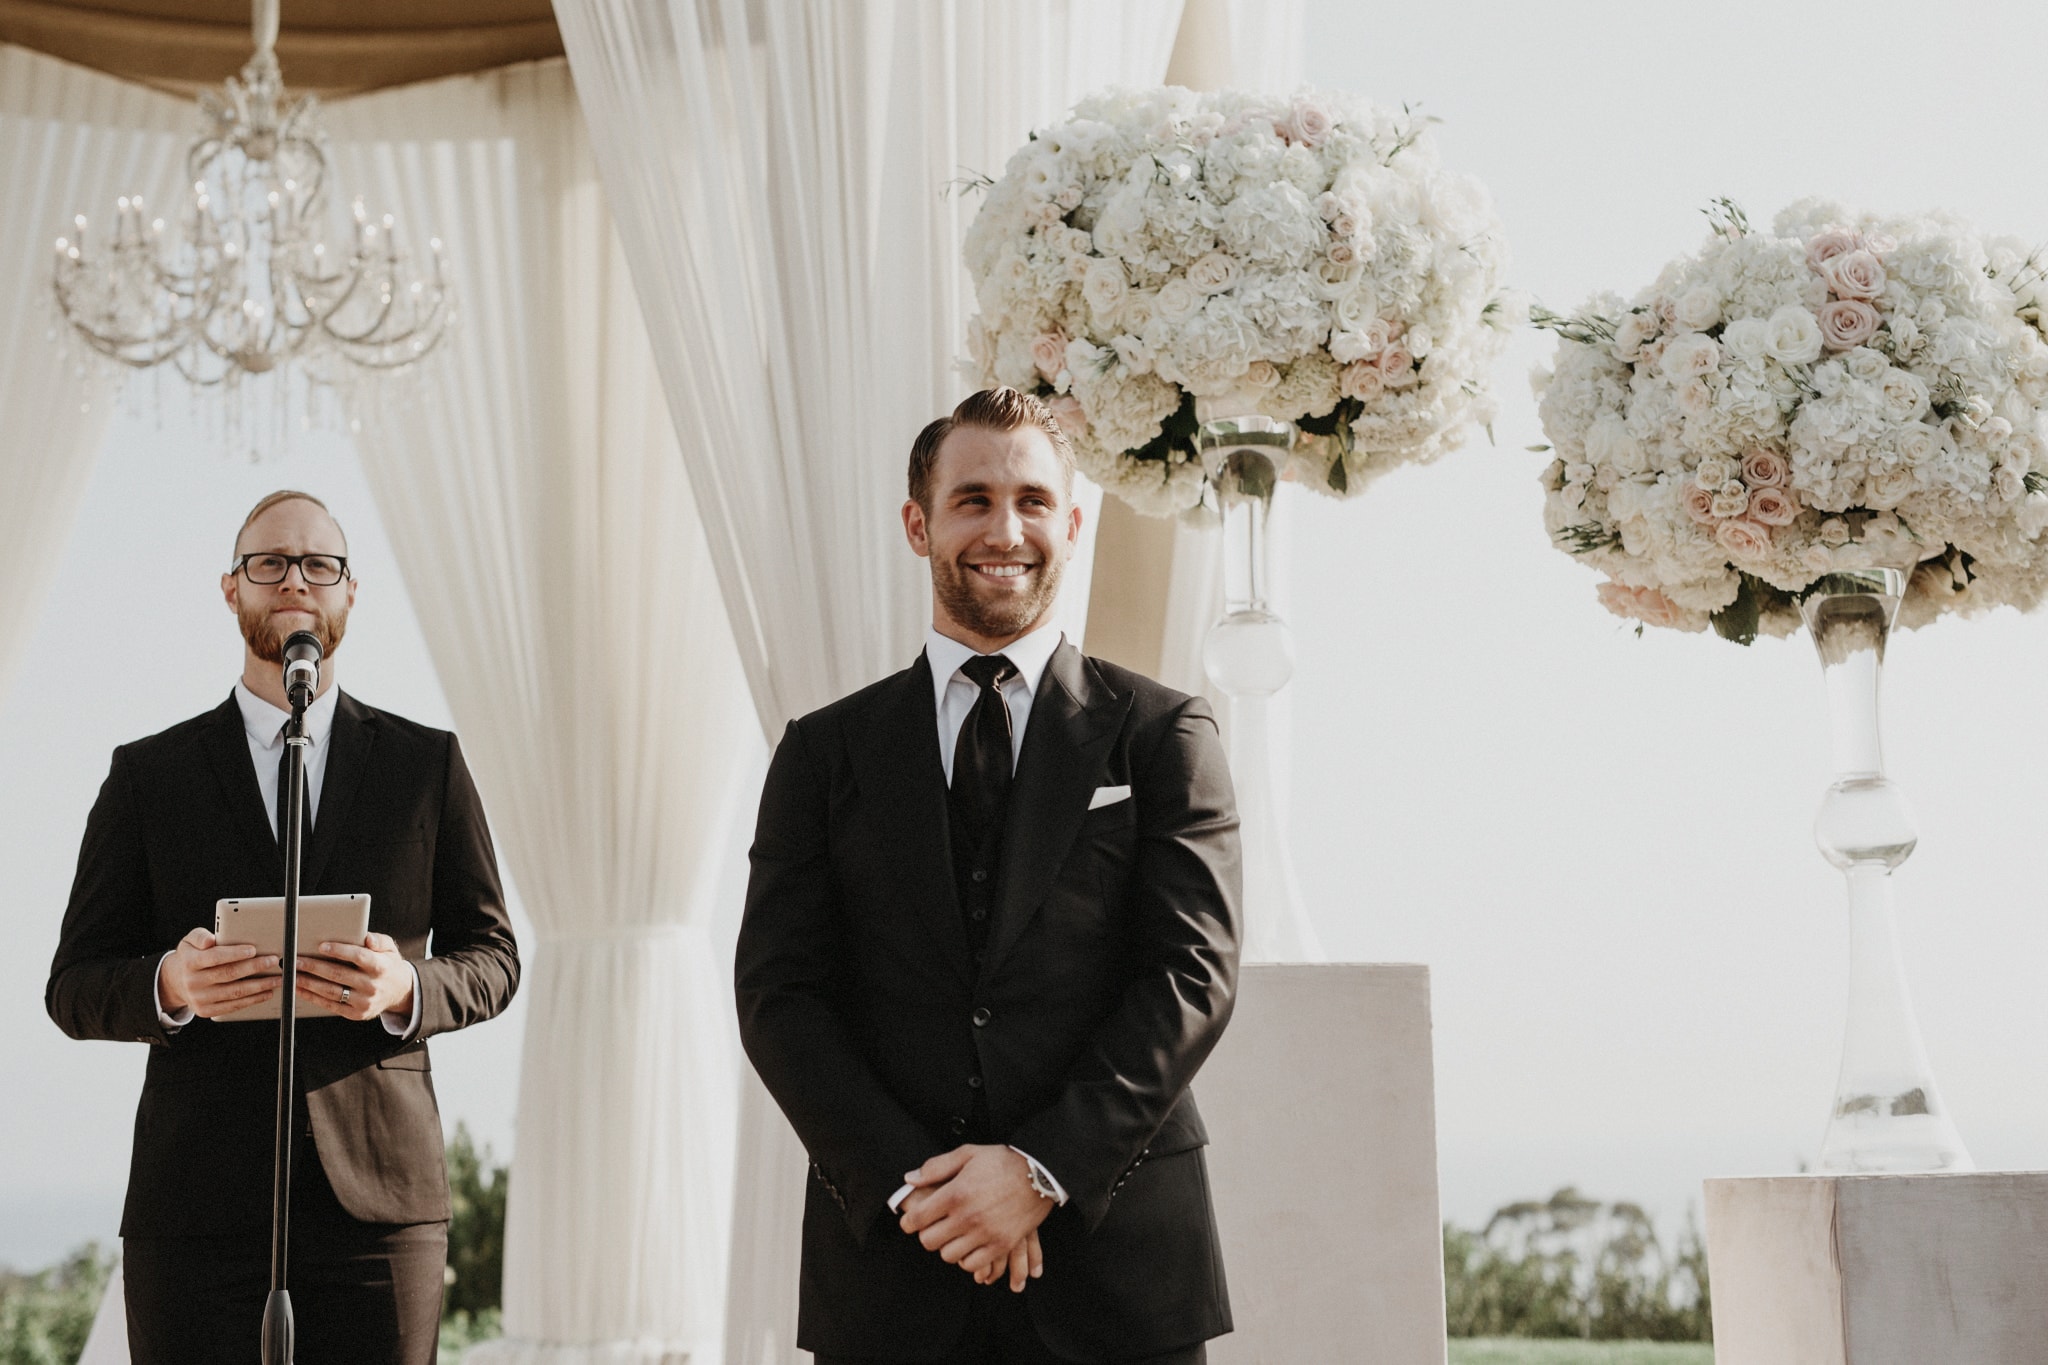 Josh Olson wedding photographer captures a handsome groom smiles at the alter at a beautiful outdoor wedding ceremony in Newport Beach, California.